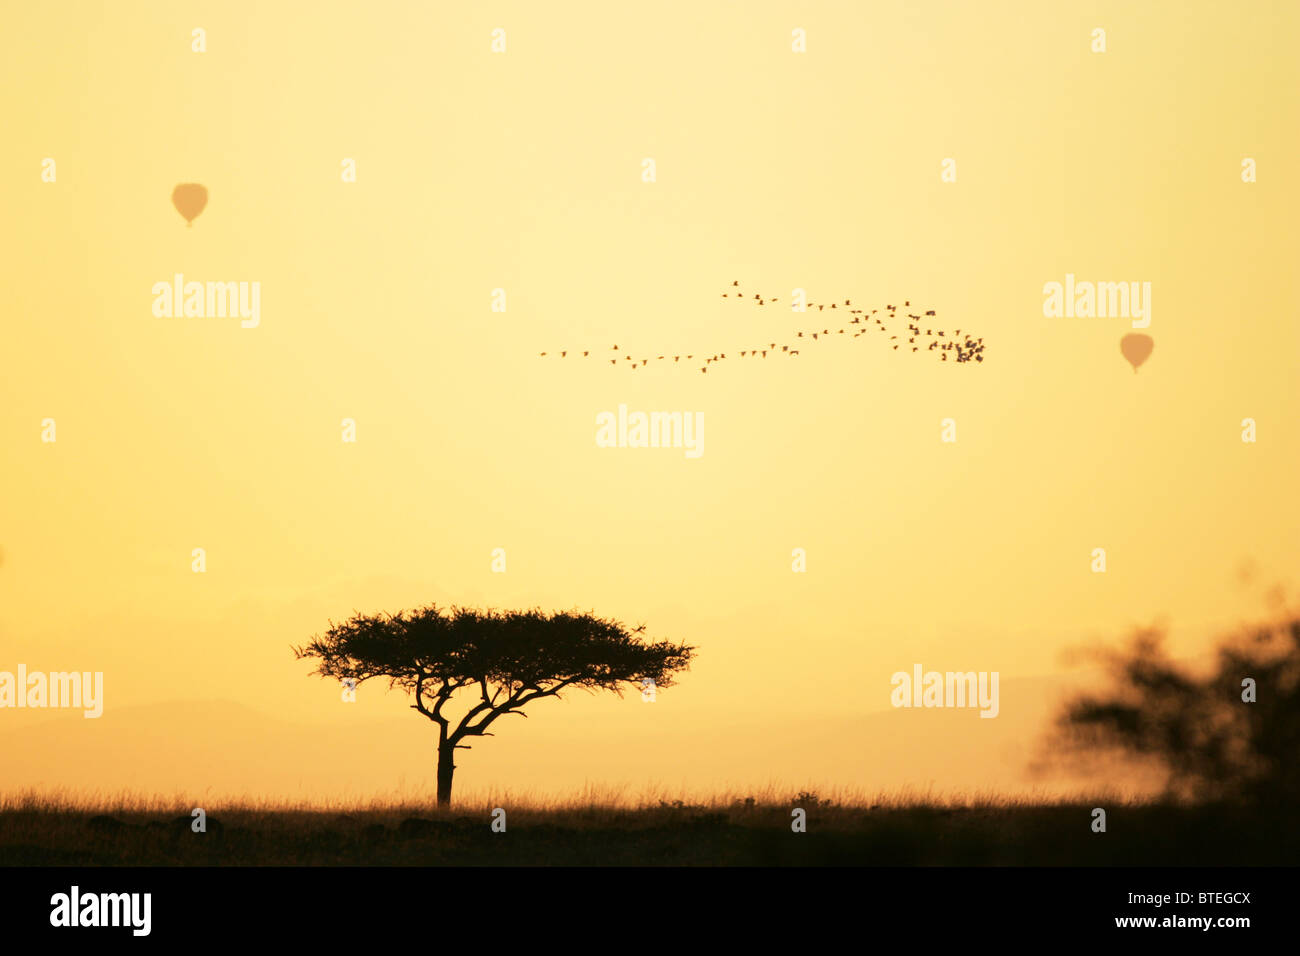 A flock of birds flying in a v- formation and two hot air balloons in the sky at sunset over the African savanna Stock Photo